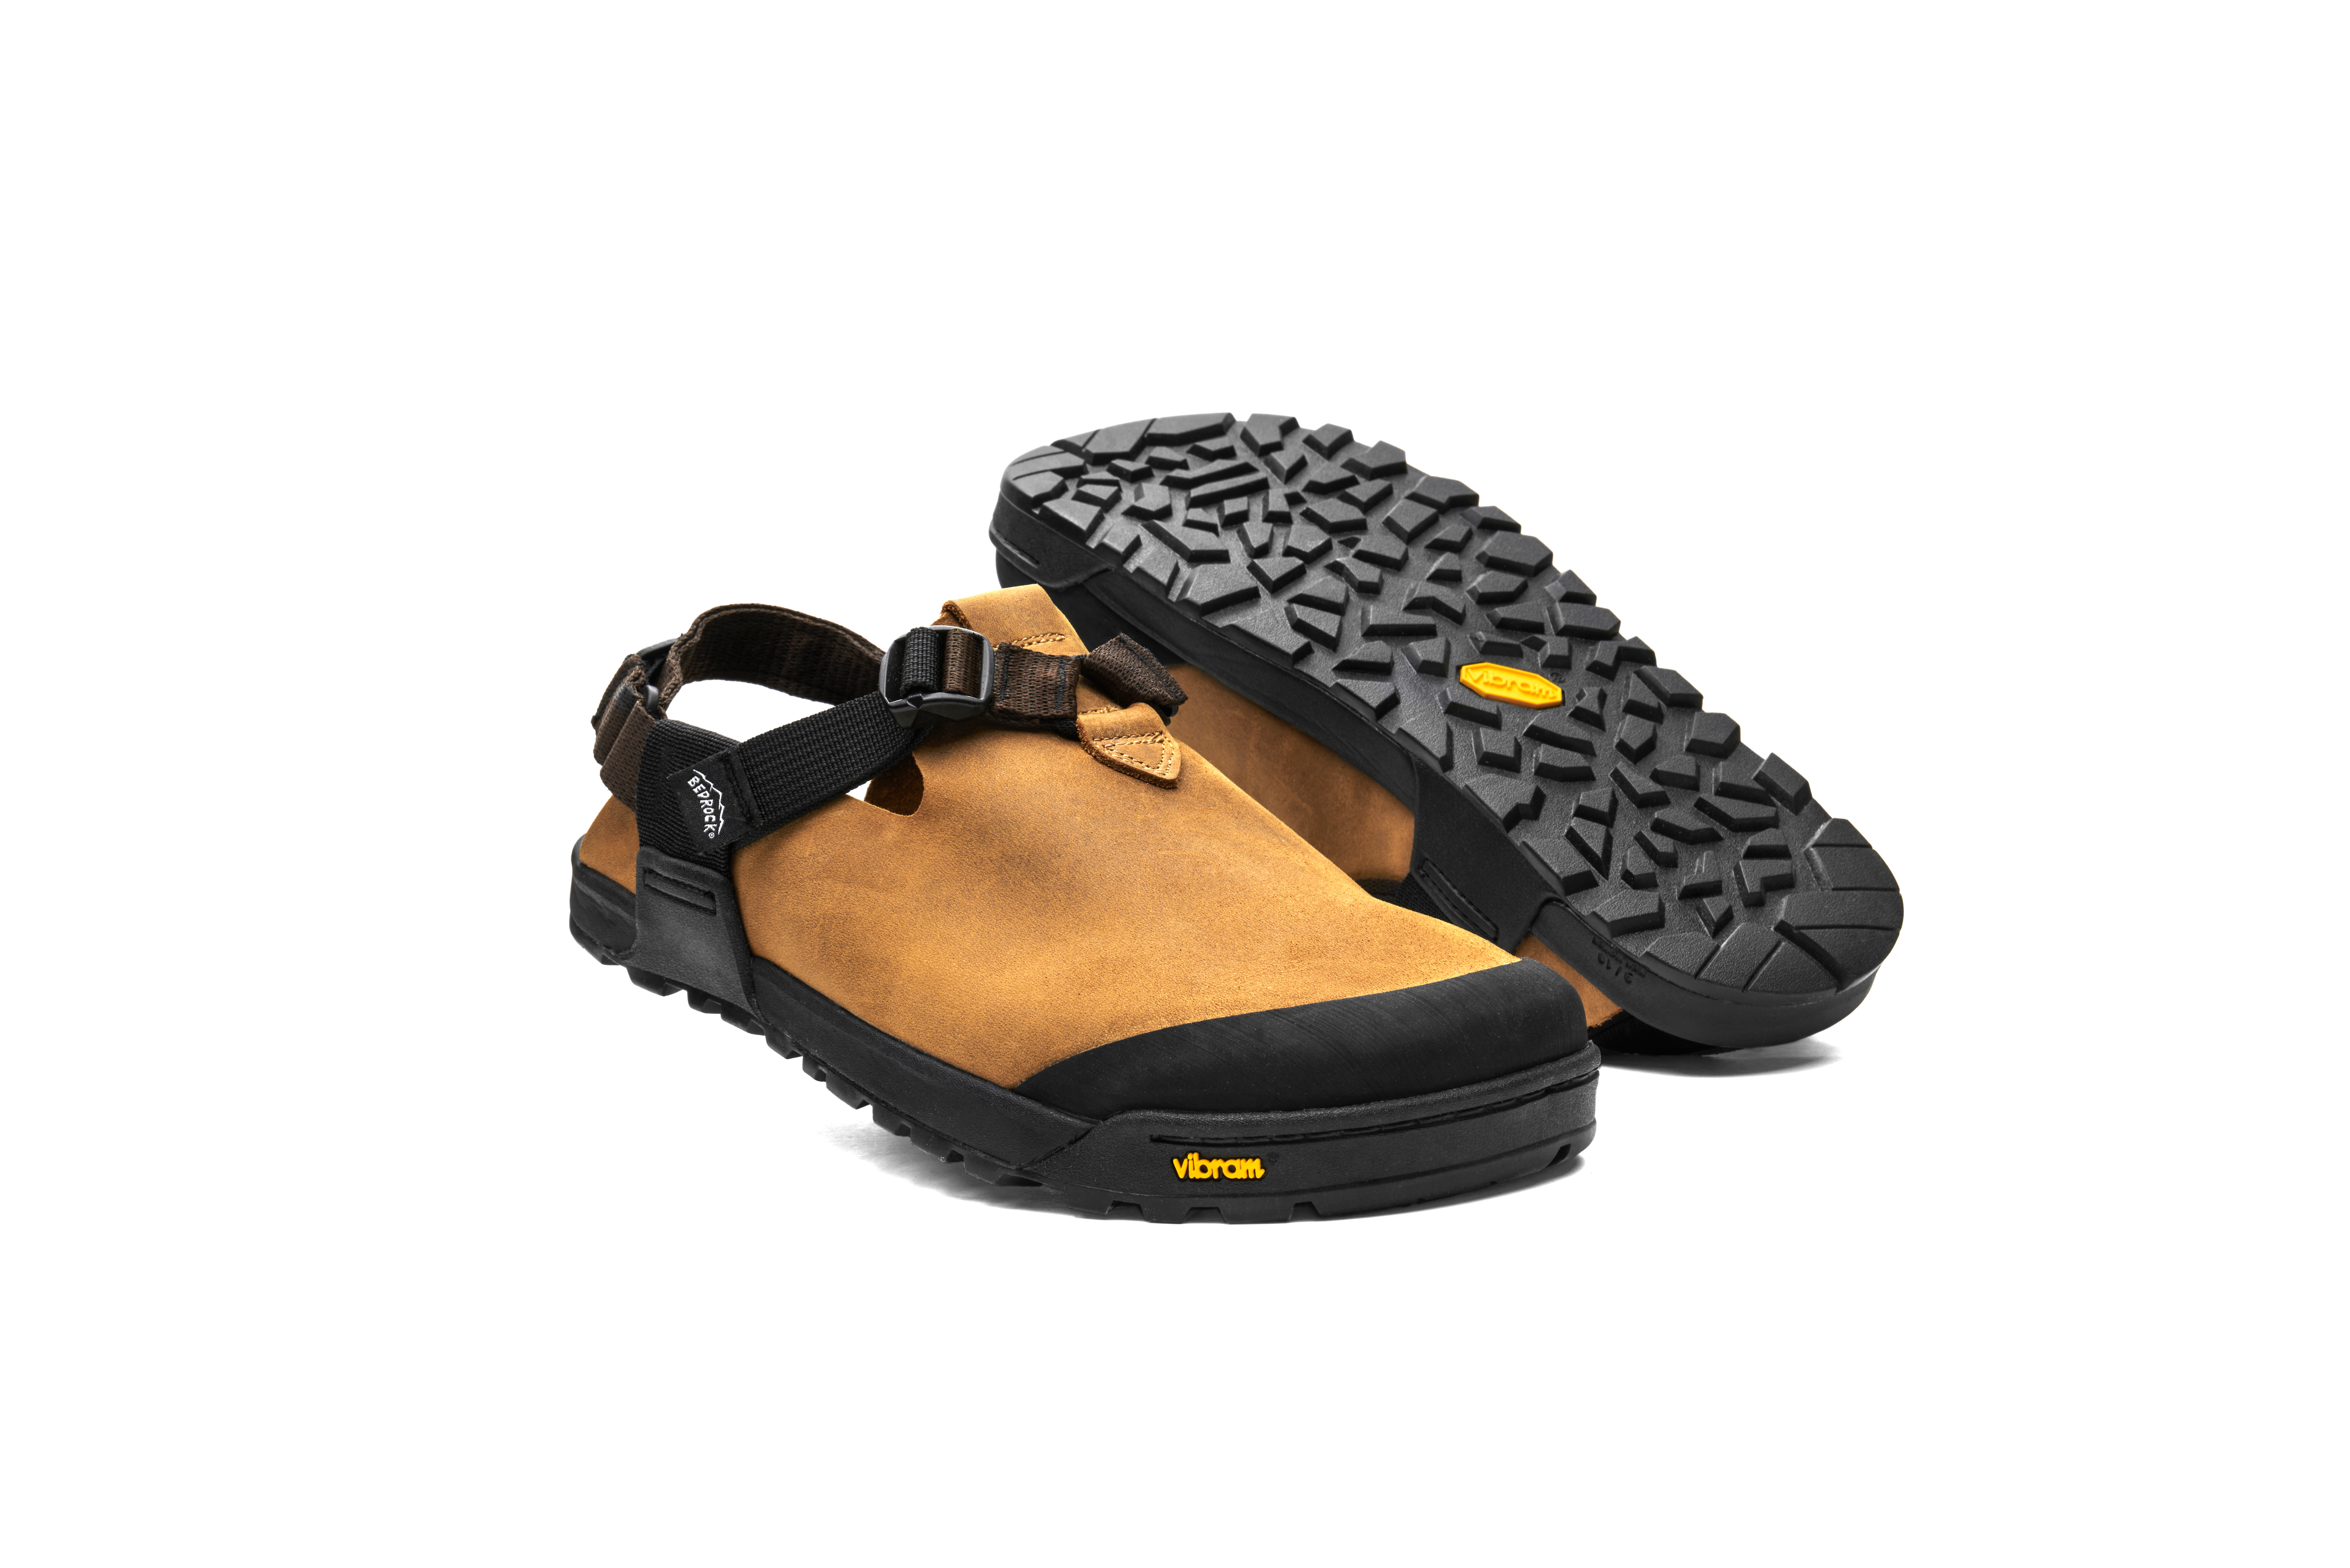 Bedrock Mountain Clogs Review: The Sandal Brand Dips Its Toes in Clogs